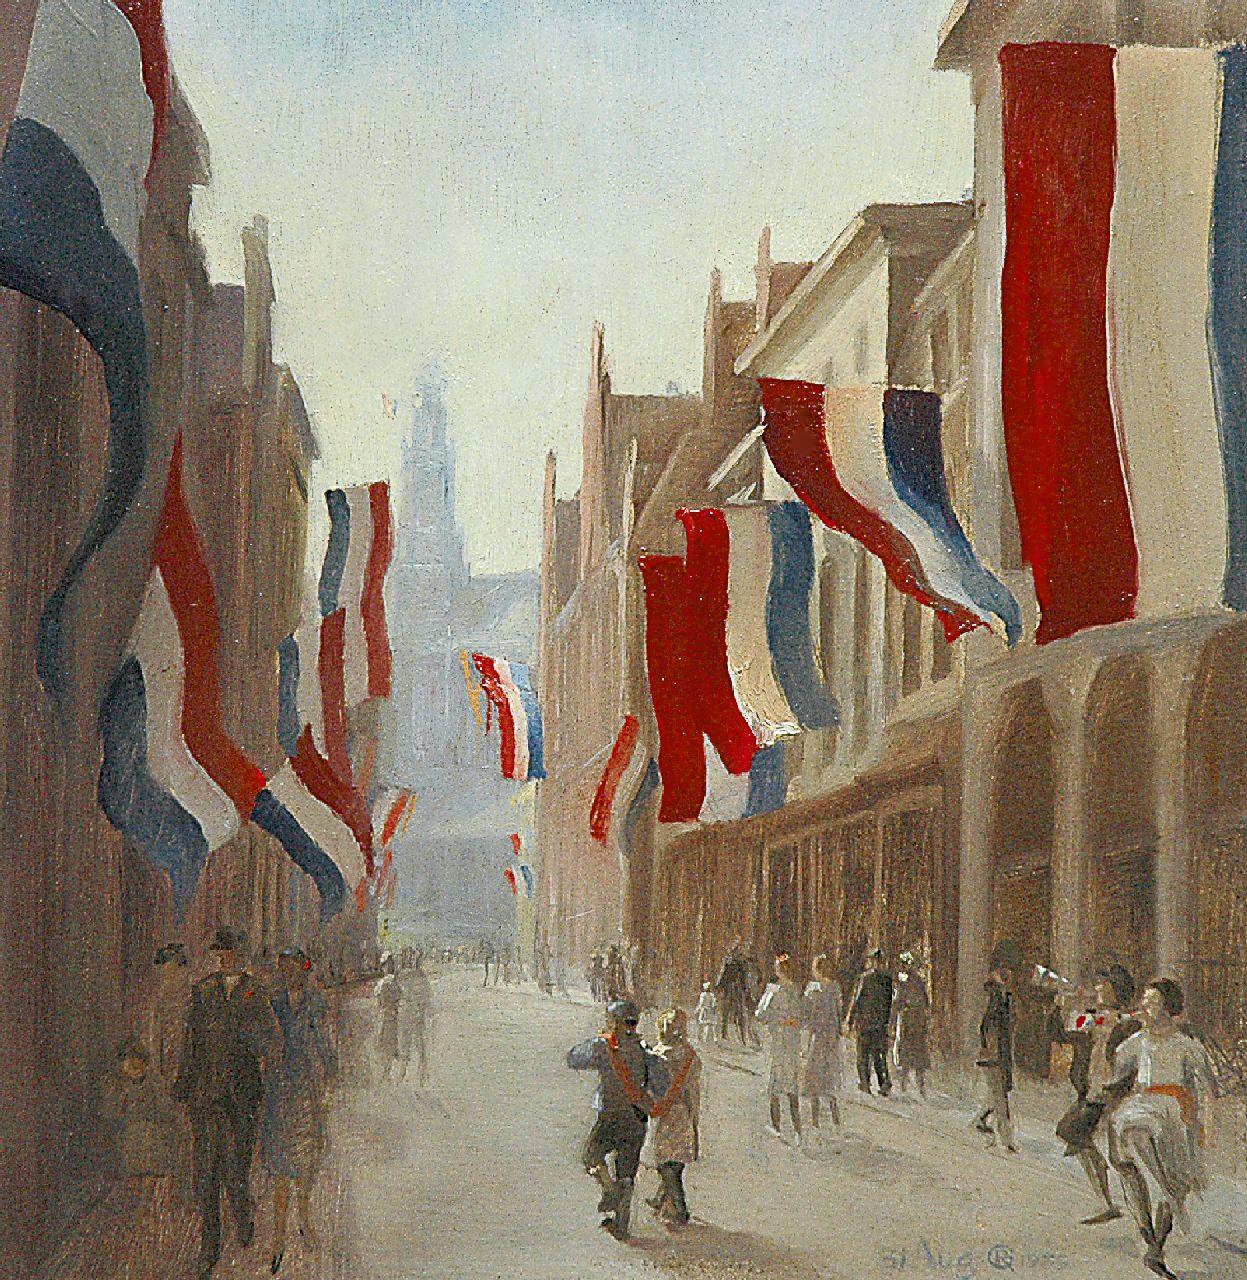 Gerbrands R.  | Roelf Gerbrands, Celebrations in Haarlem for the birth of Princess Irene, oil on panel 22.4 x 22.0 cm, signed l.r. with monogram and dated 31 Aug. 1939